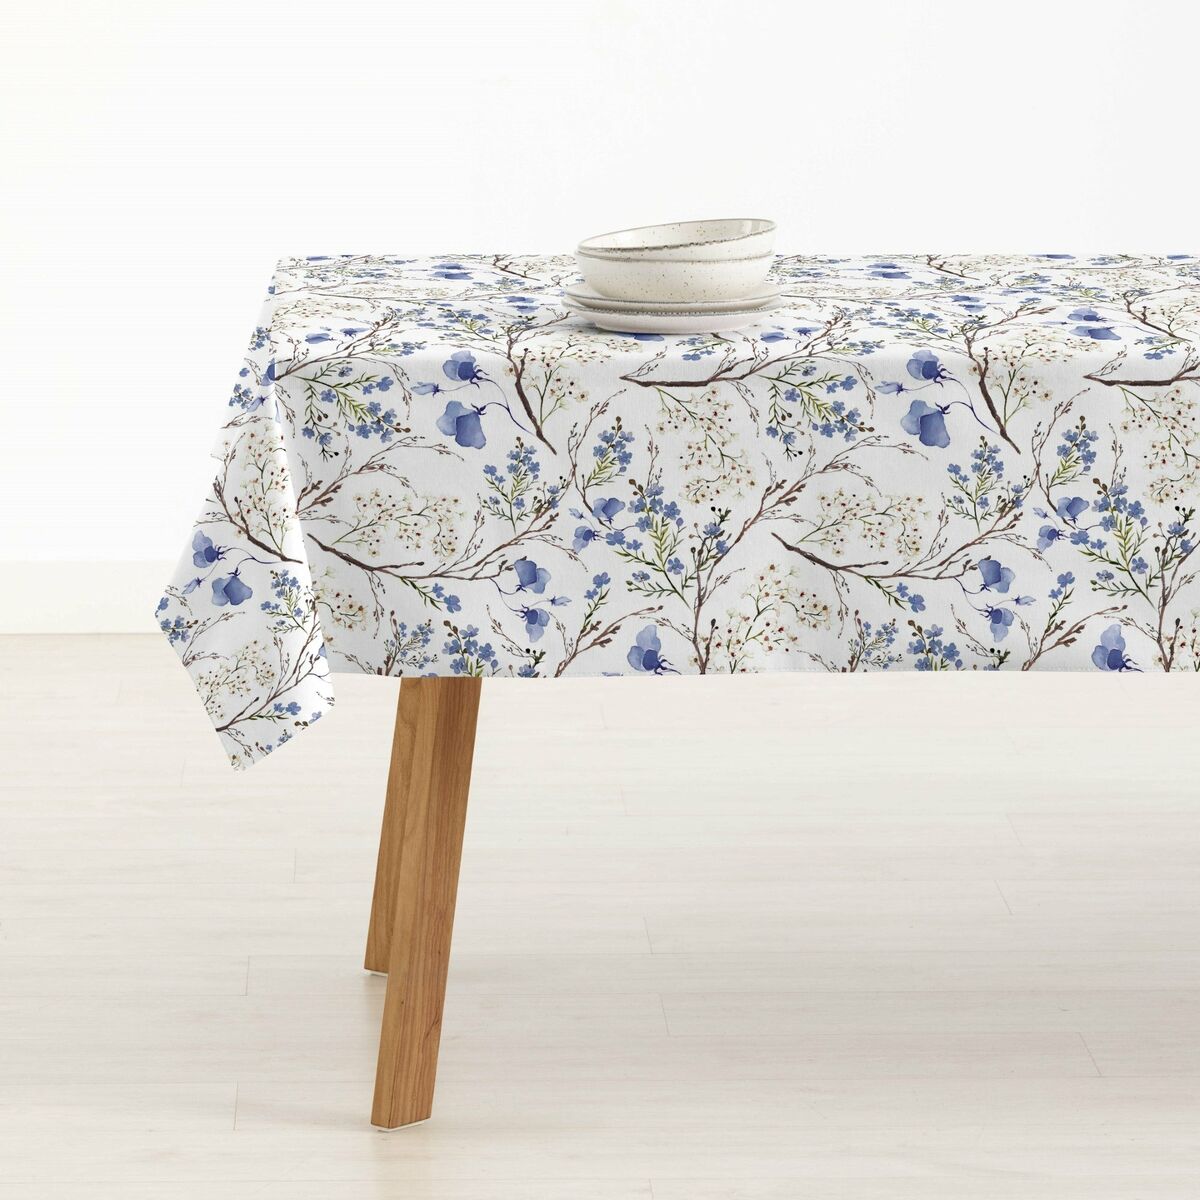 Stain-proof tablecloth Belum 0120-376 100 x 140 cm